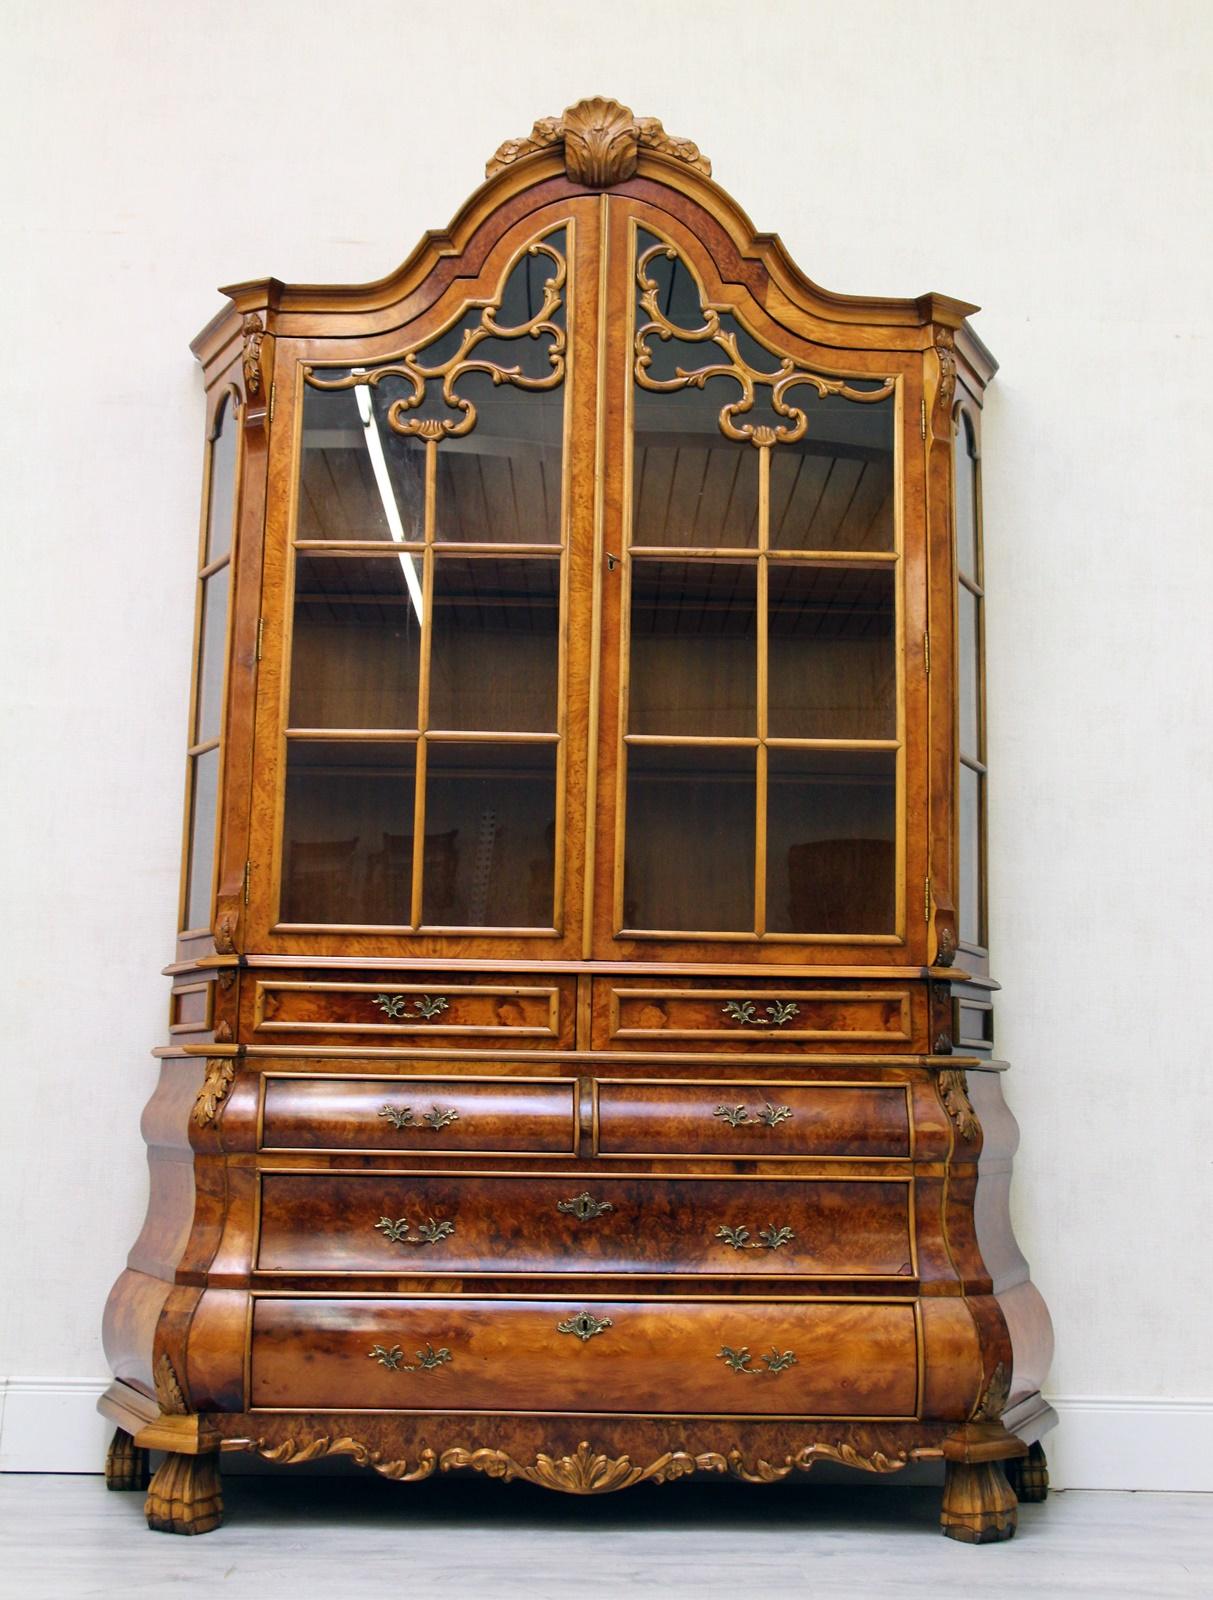 English display case made of solid walnut wood
Condition: The showcase is in good condition and still has the charm of the 